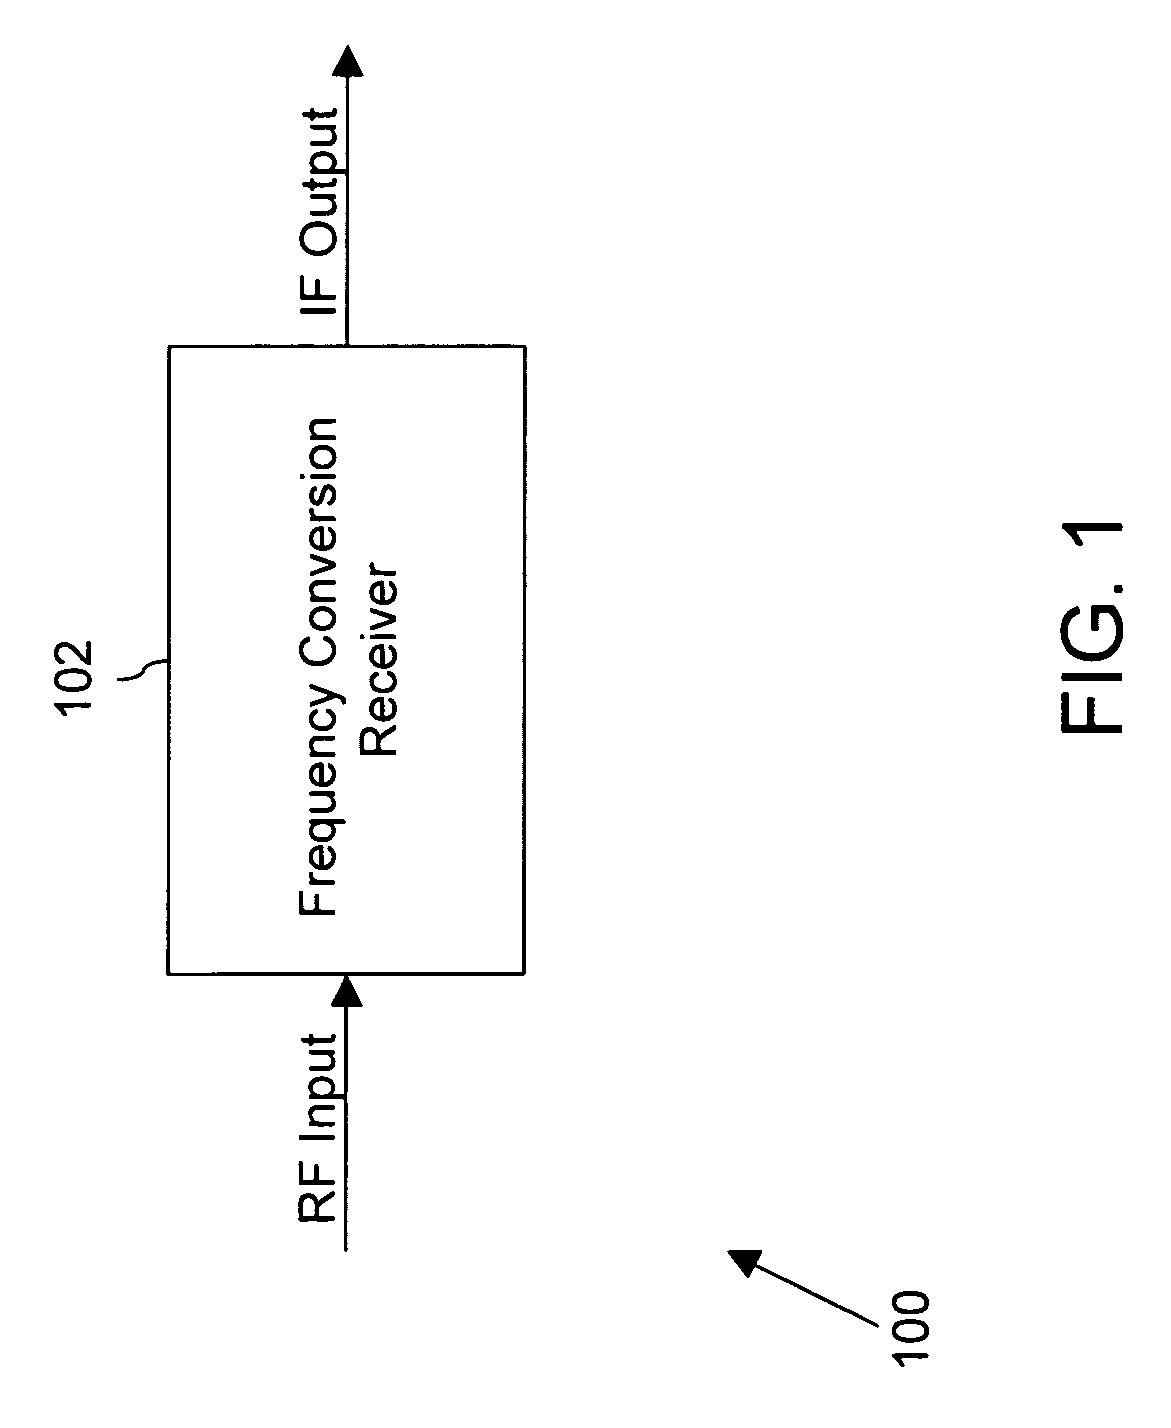 System and method for frequency multiplexing in double-conversion receivers